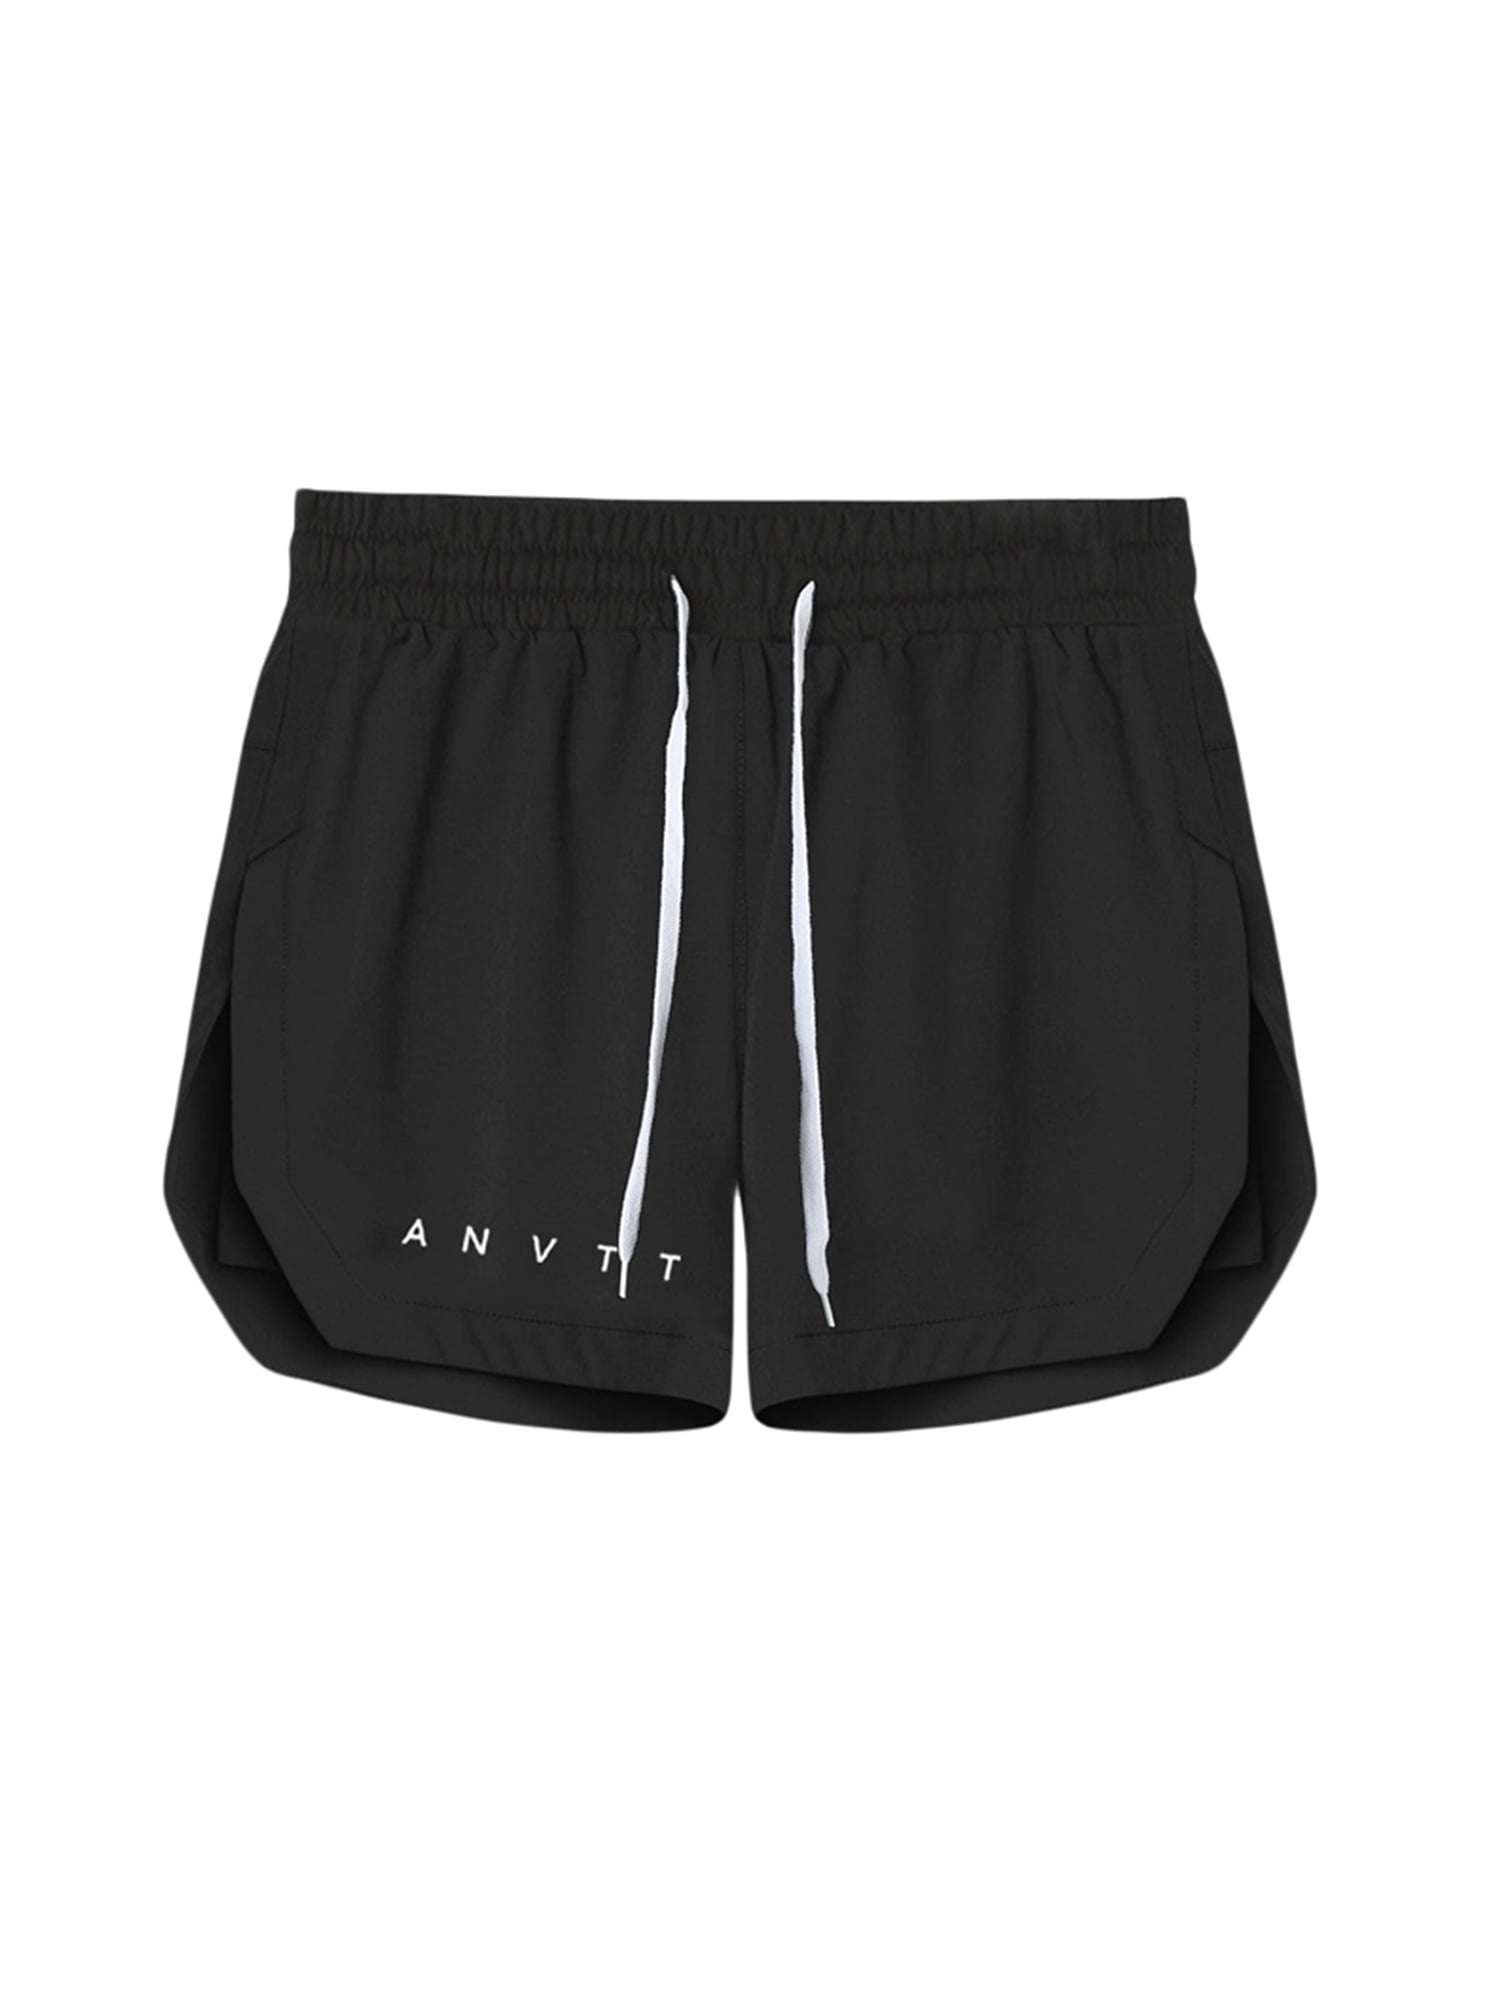 URSING Running Shorts with Liner Pockets Womens 2 in 1 Running Sports Shorts Quick Dry Leggings Elastic Fashion Loose Casual Shorts Gym Running Work Out Sport Shorts with Adjustable Drawstring 